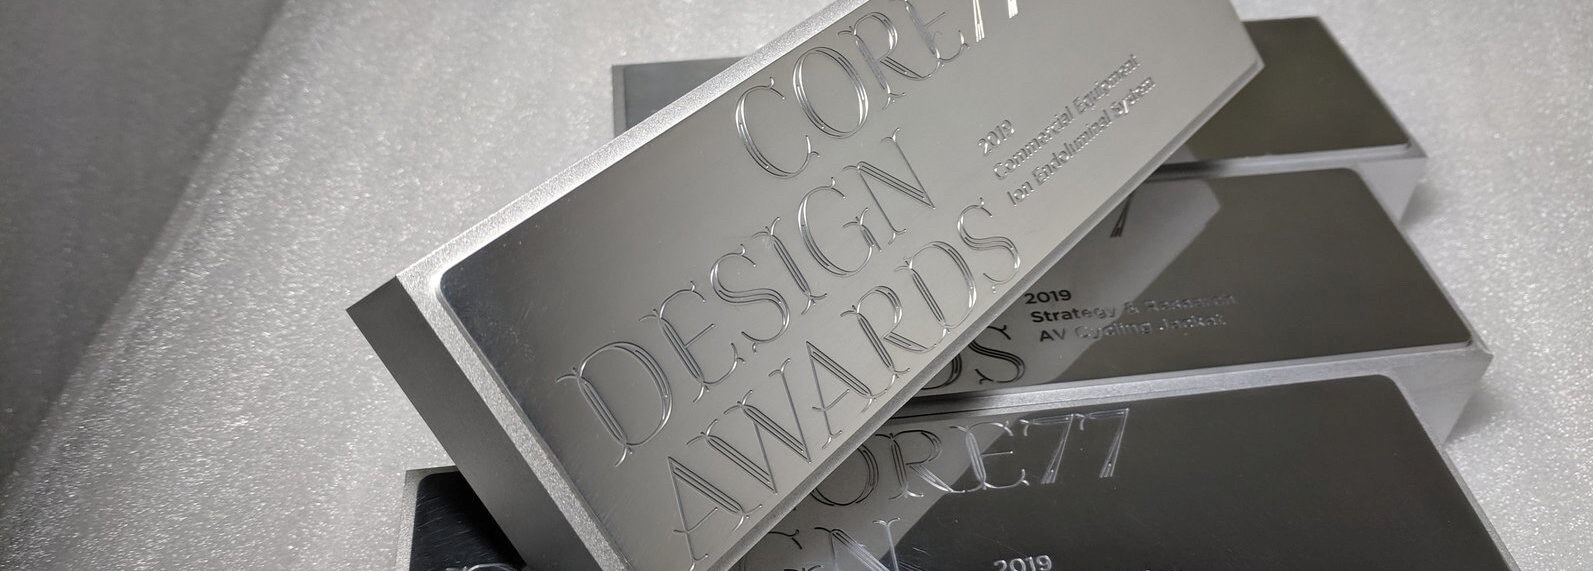 Precision machined trophies for Core77 Design Awards